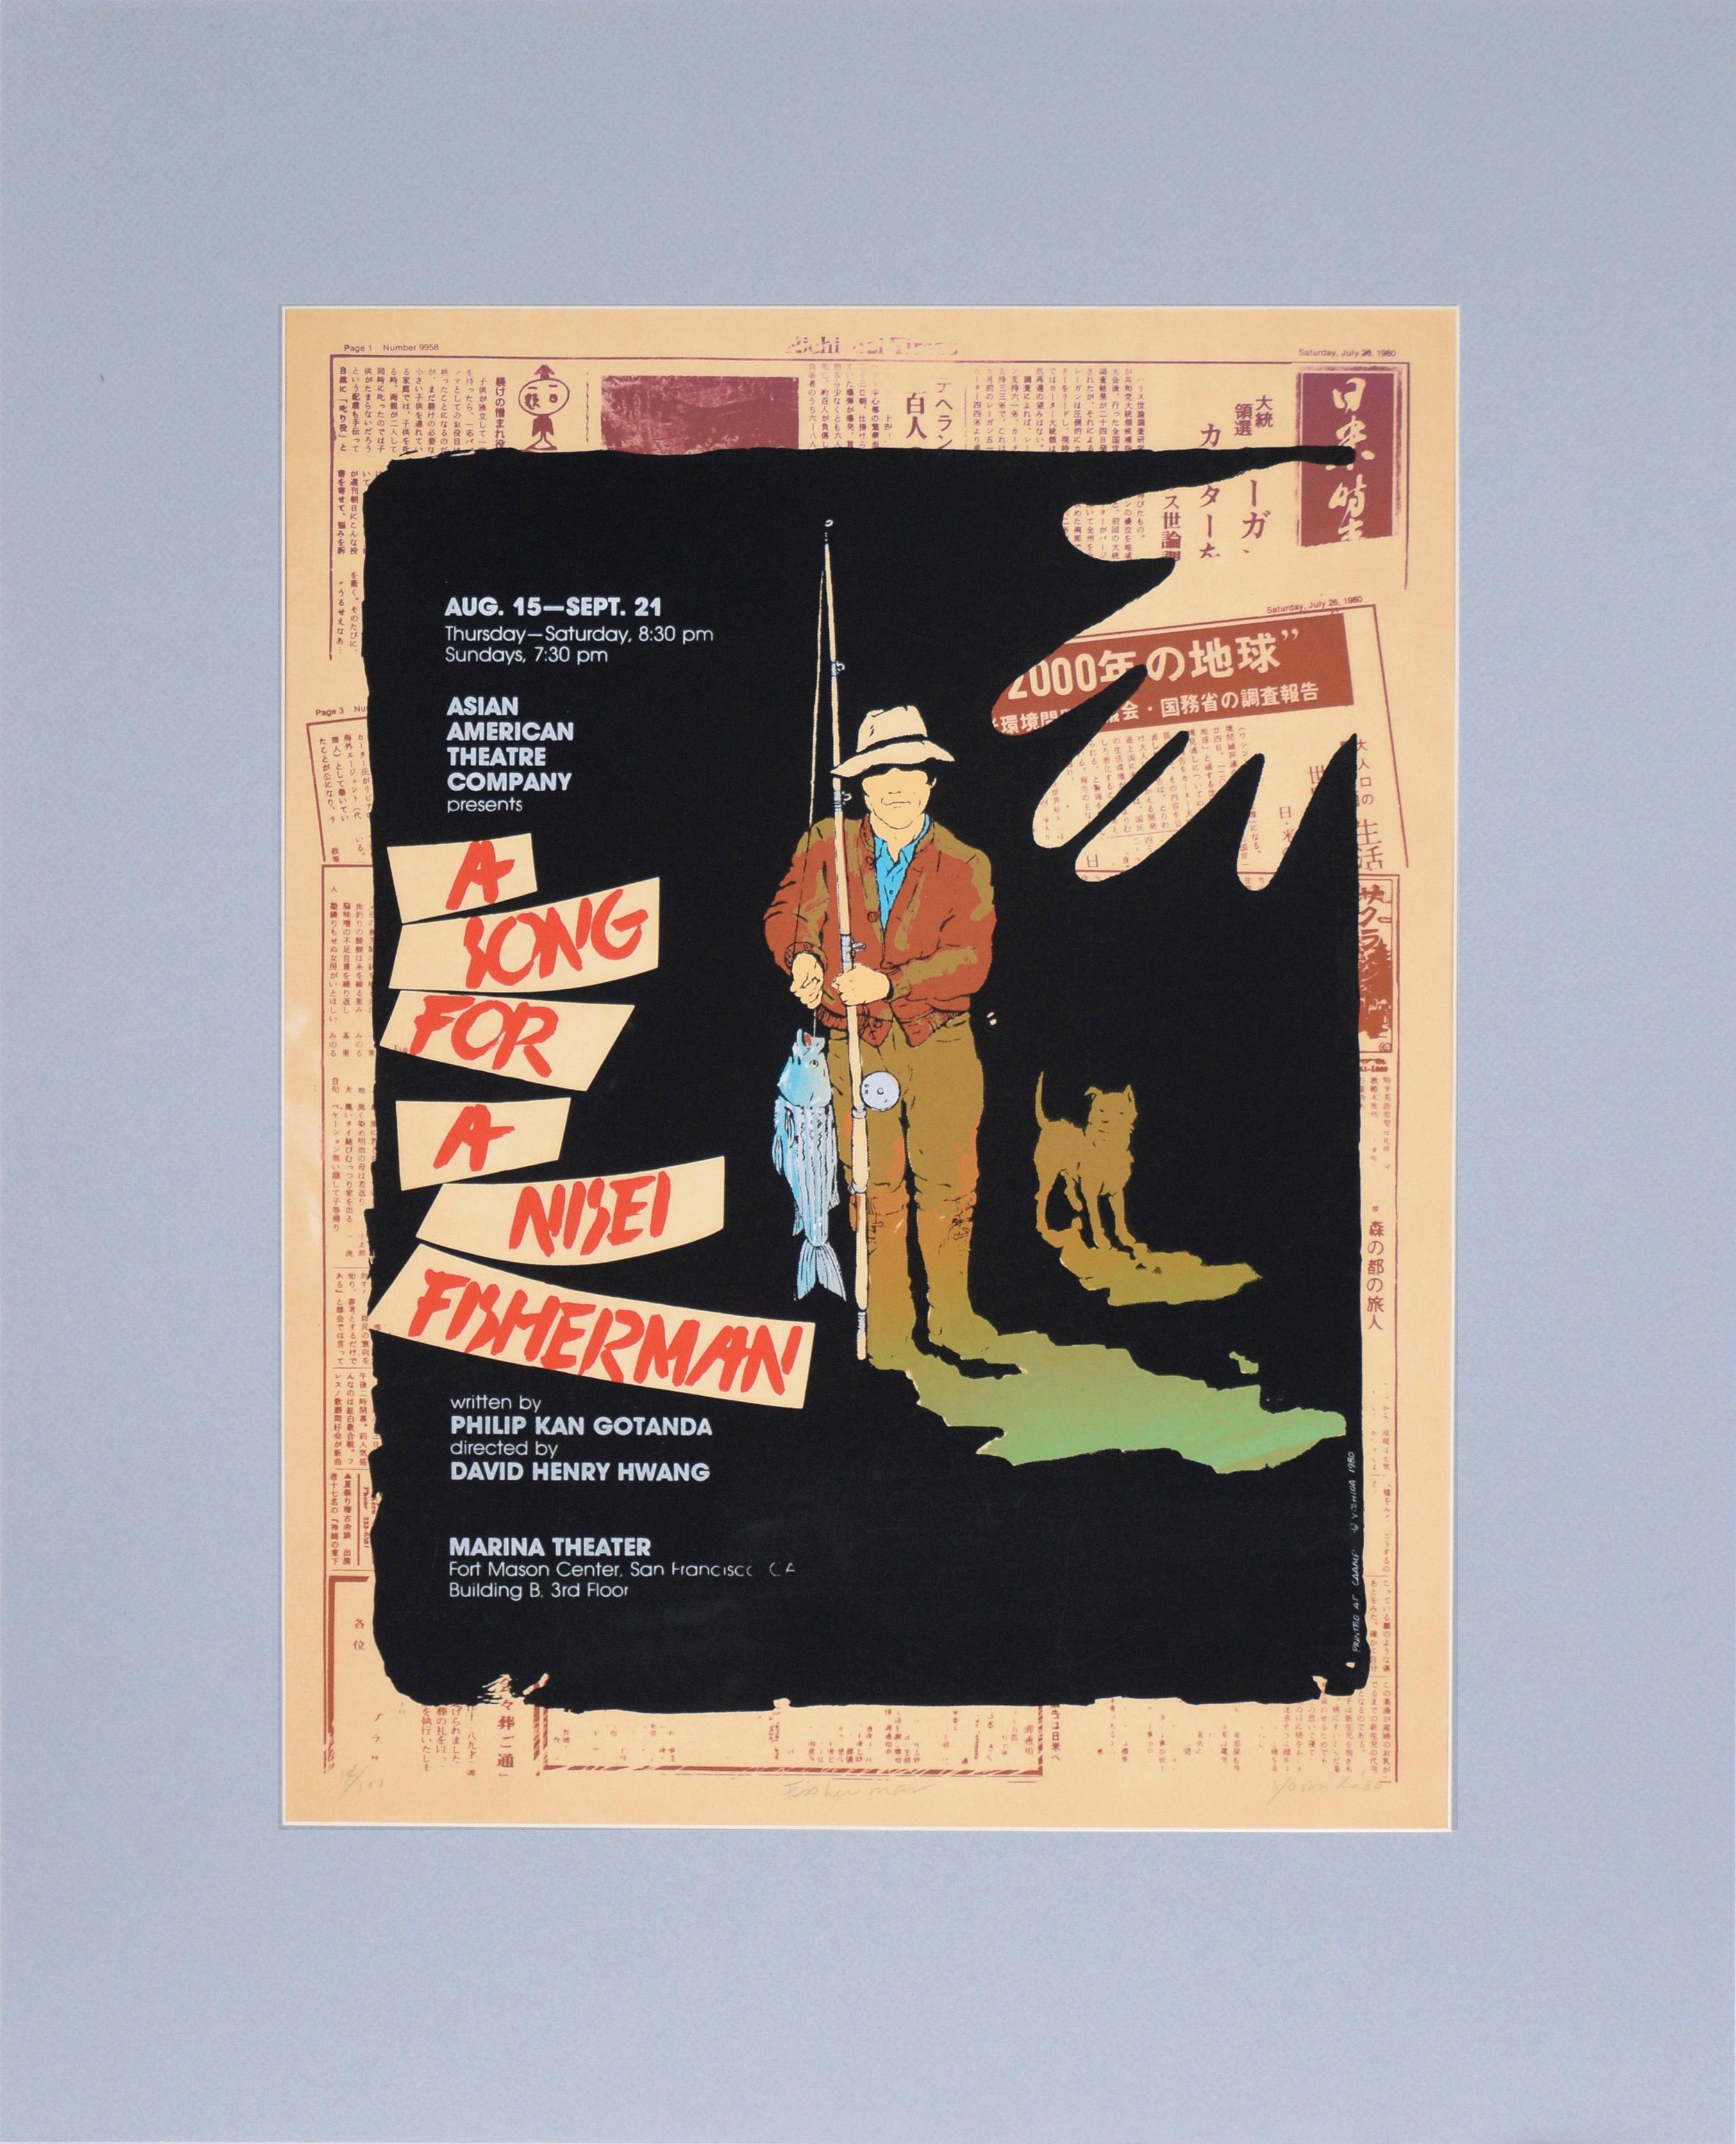 Chester Yoshida Print - "A Song for a Nesei Fisherman" Poster, Limited Edition Screenprint #14 of 100